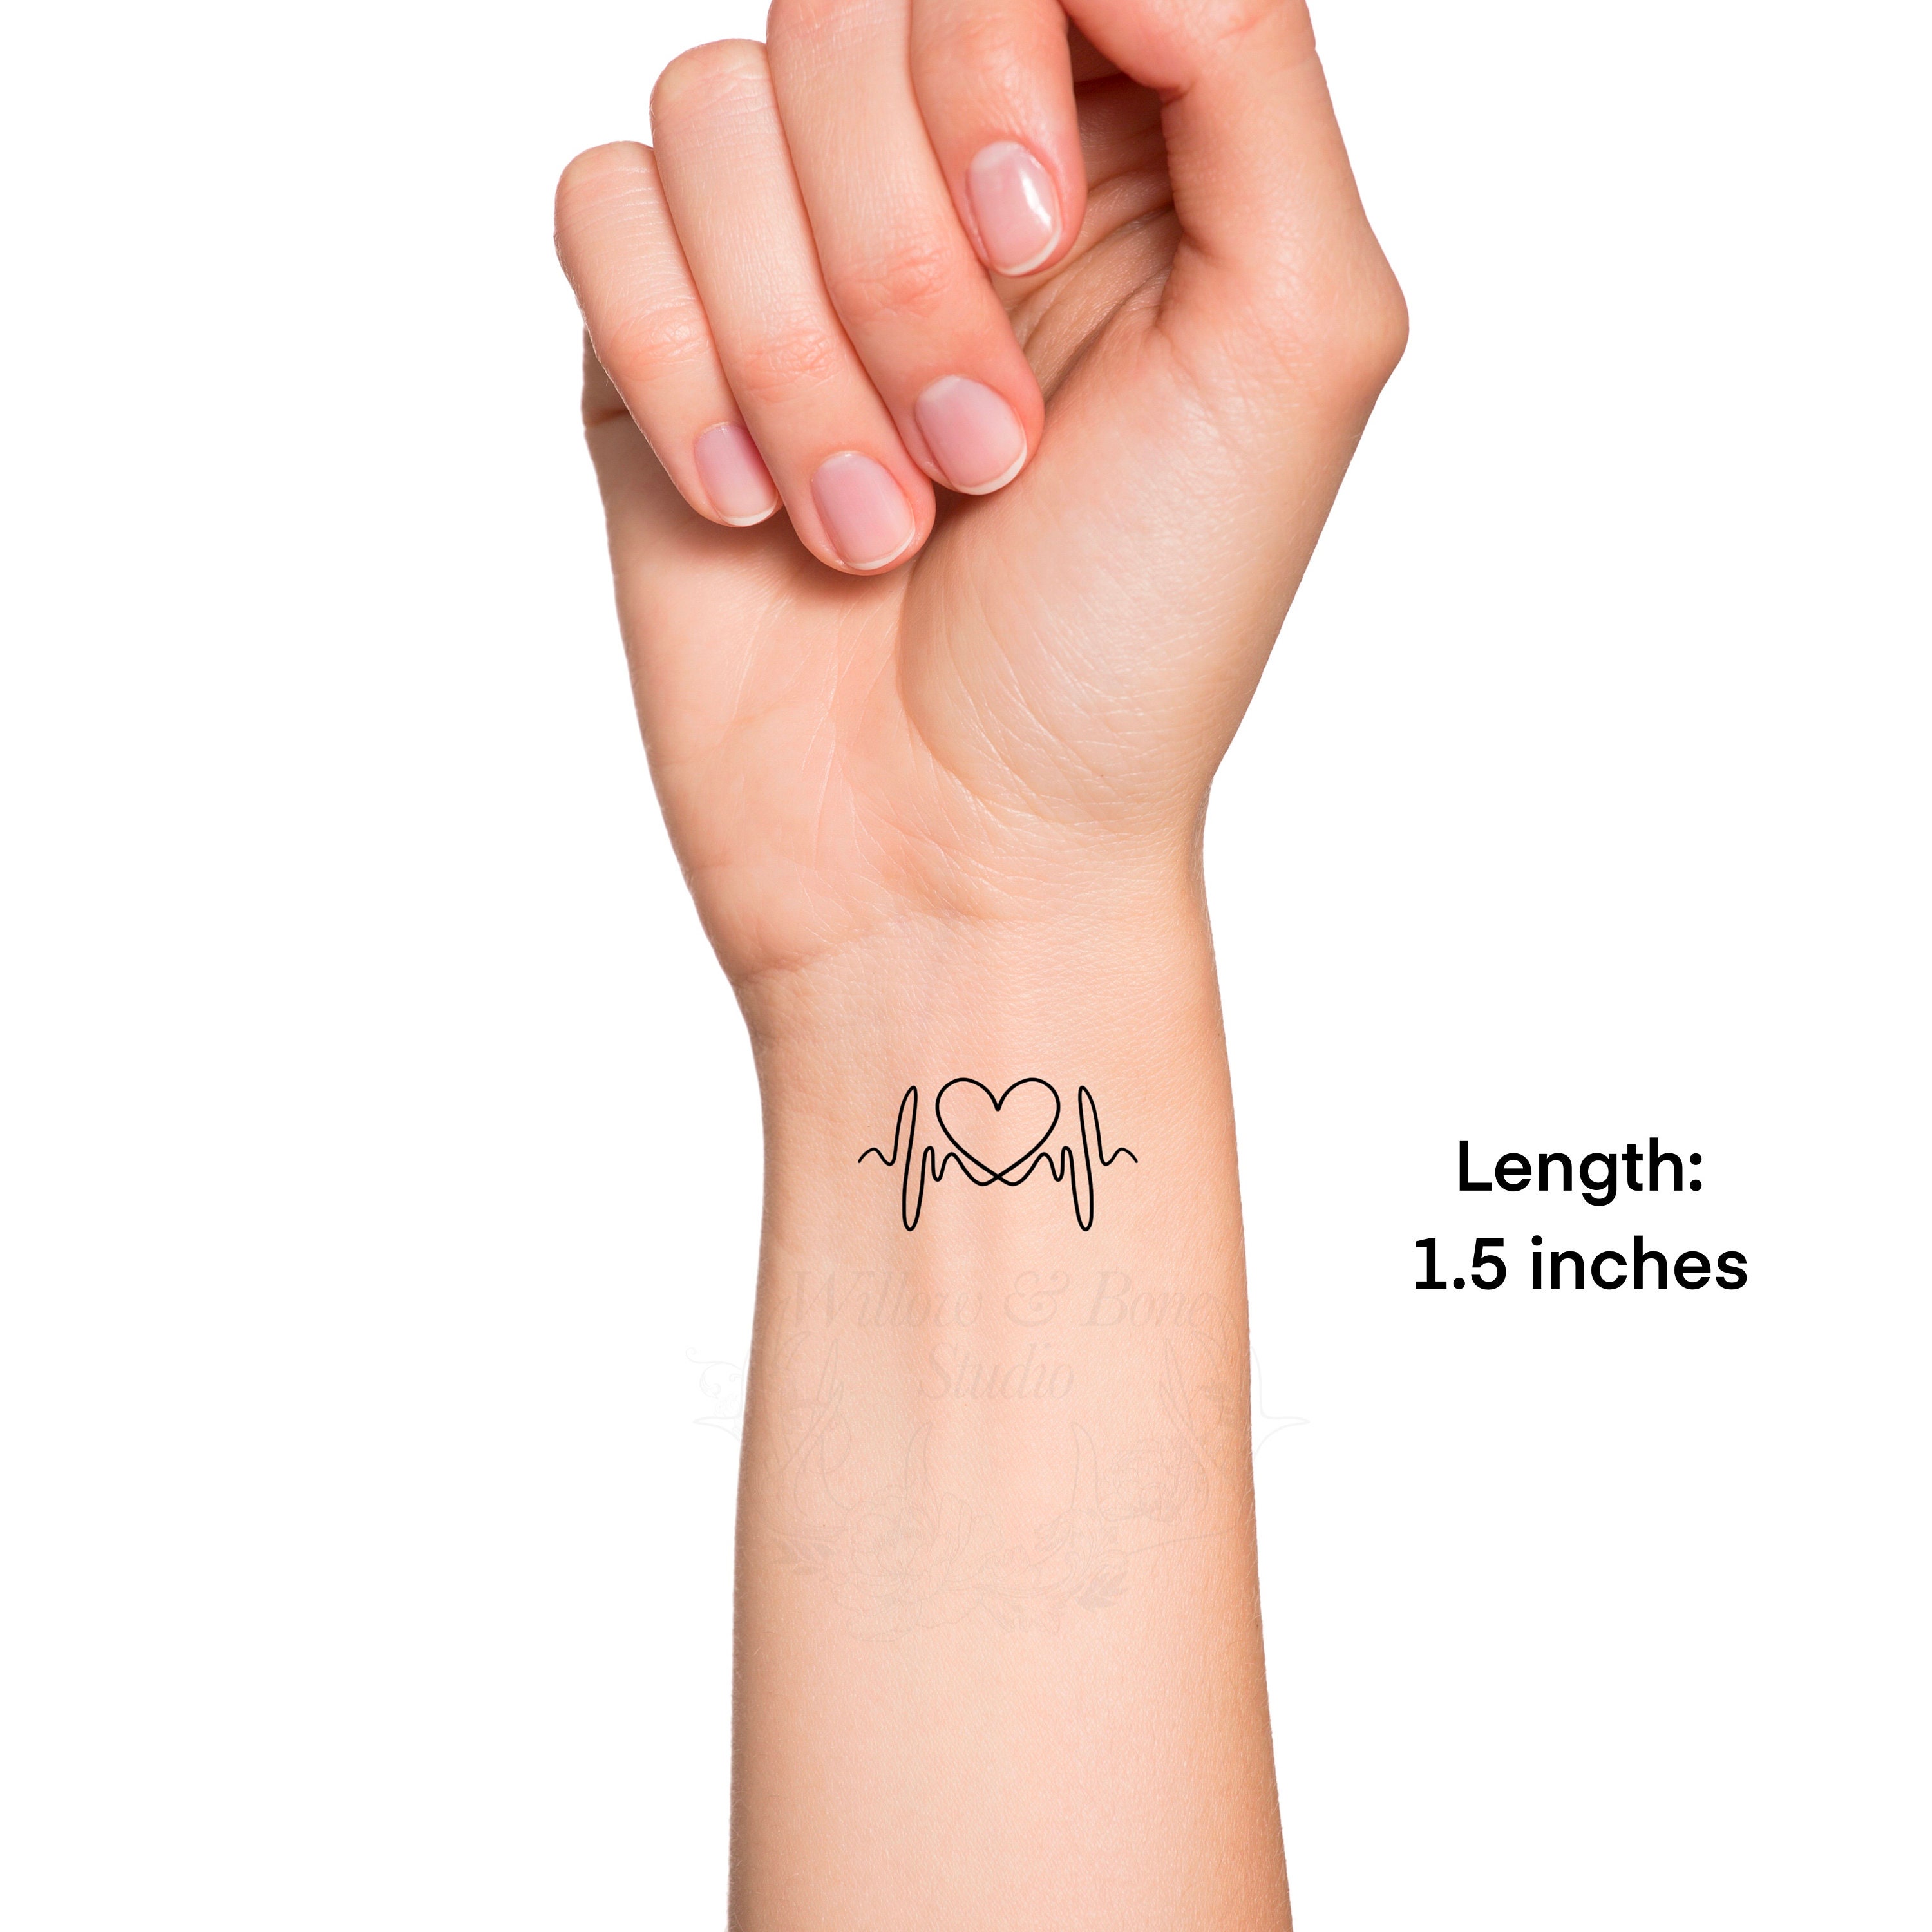 4pcs Temporary Tattoo Stickers With Bird, Flower, Heartbeat, And Line  Patterns For Finger, Wrist, And Small Body Areas | SHEIN EUQS